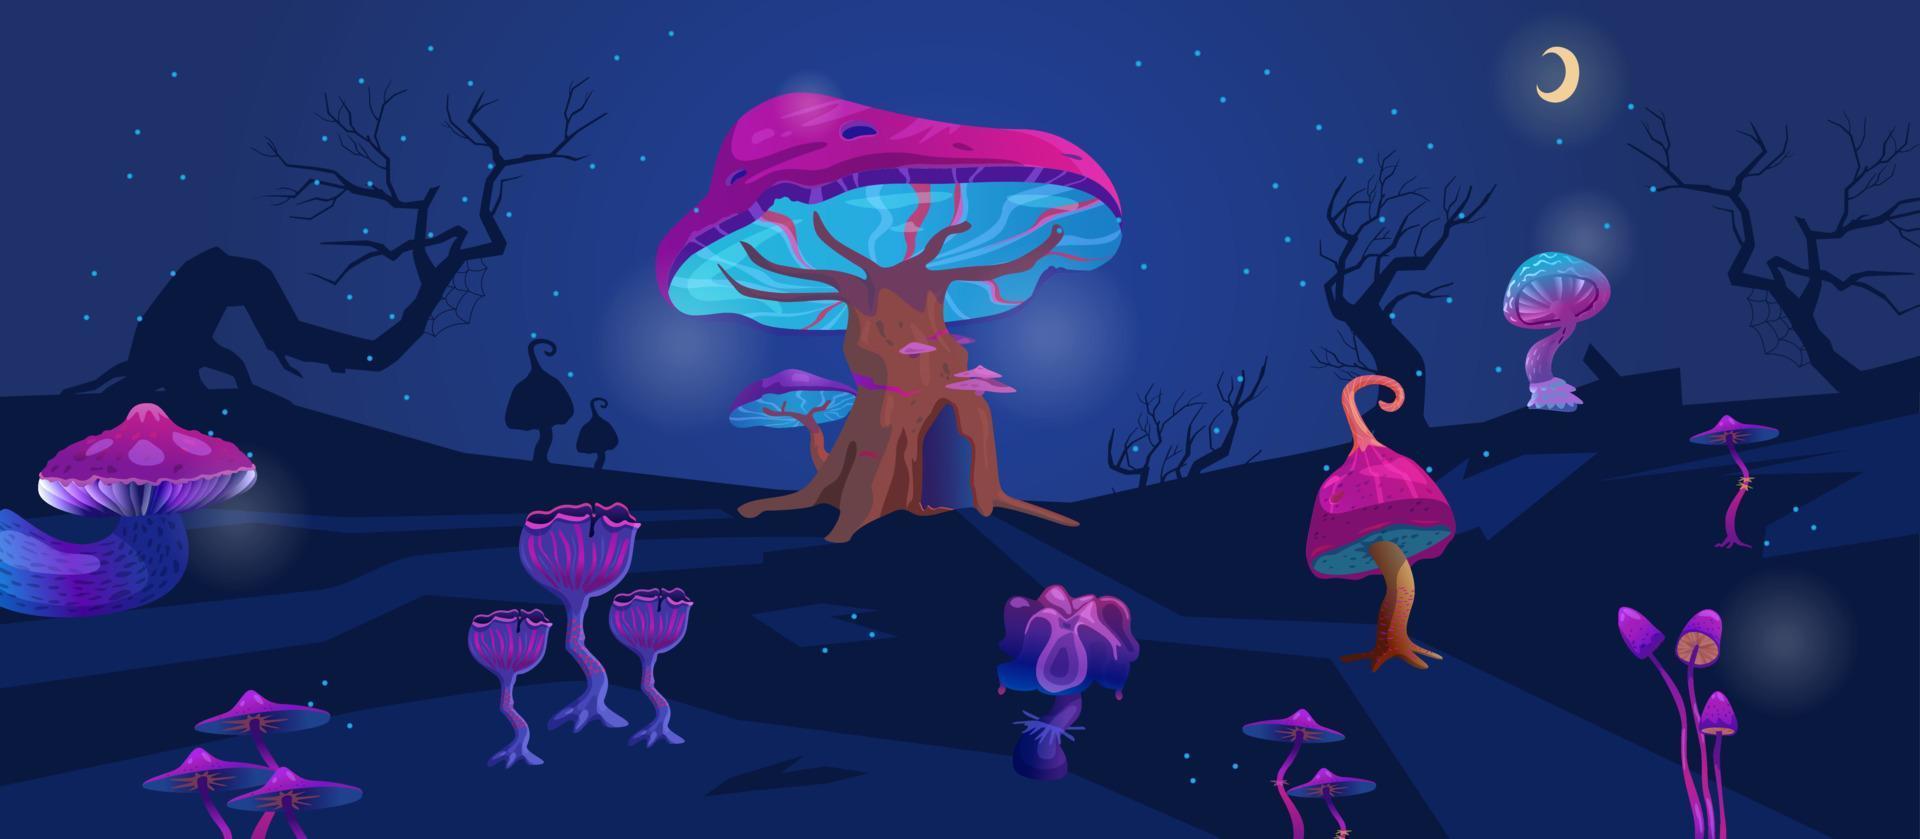 Night landscape with magic glowing mushrooms cartoon vector illustration. Gaming background.